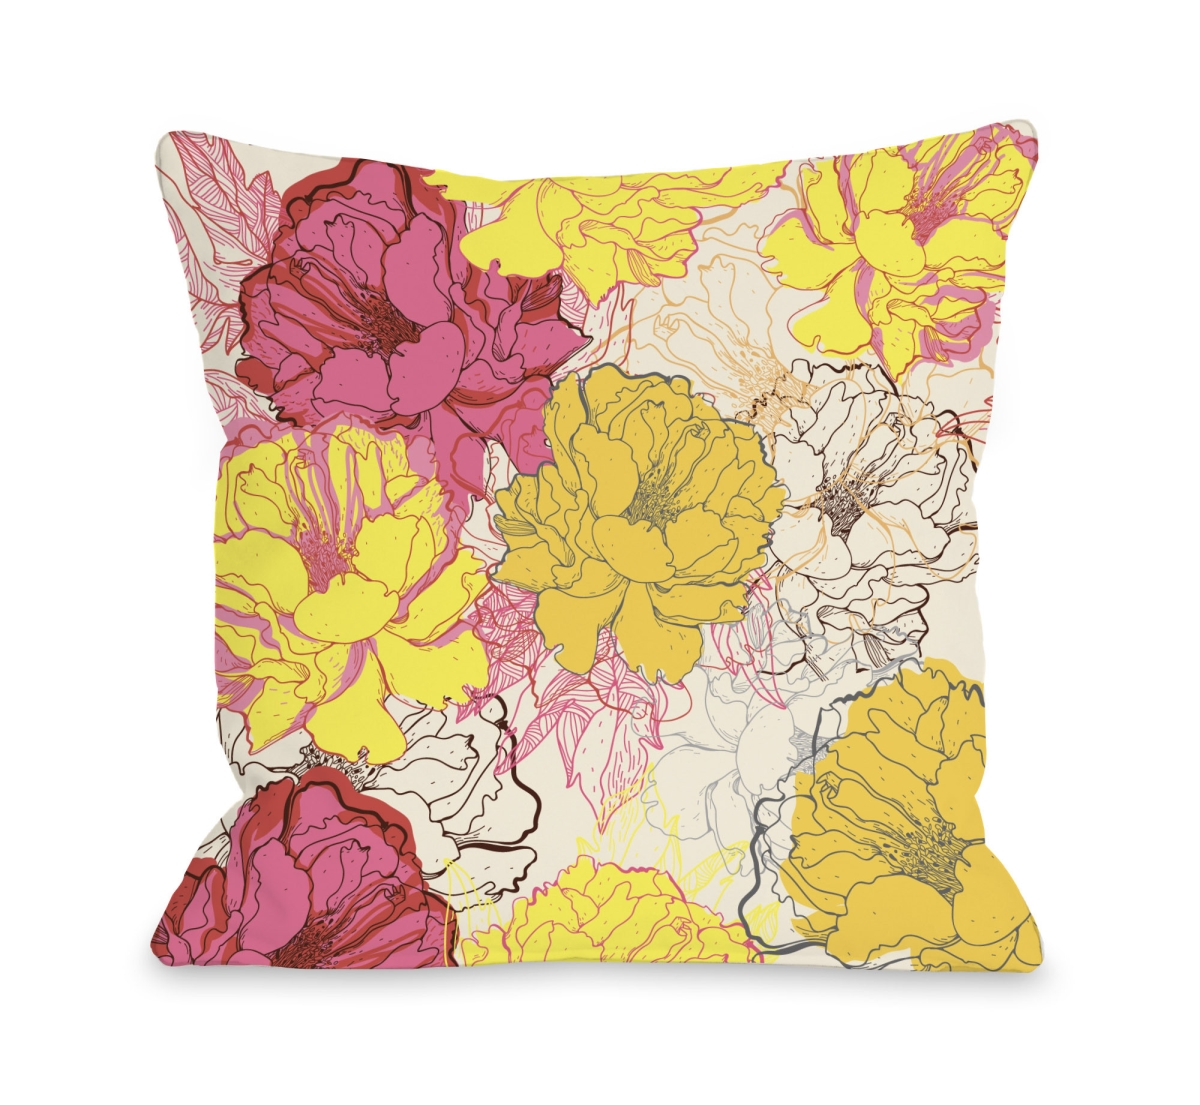 72453pl16 16 X 16 In. Natalies Blooms Pillow, Yellow & Multicolor